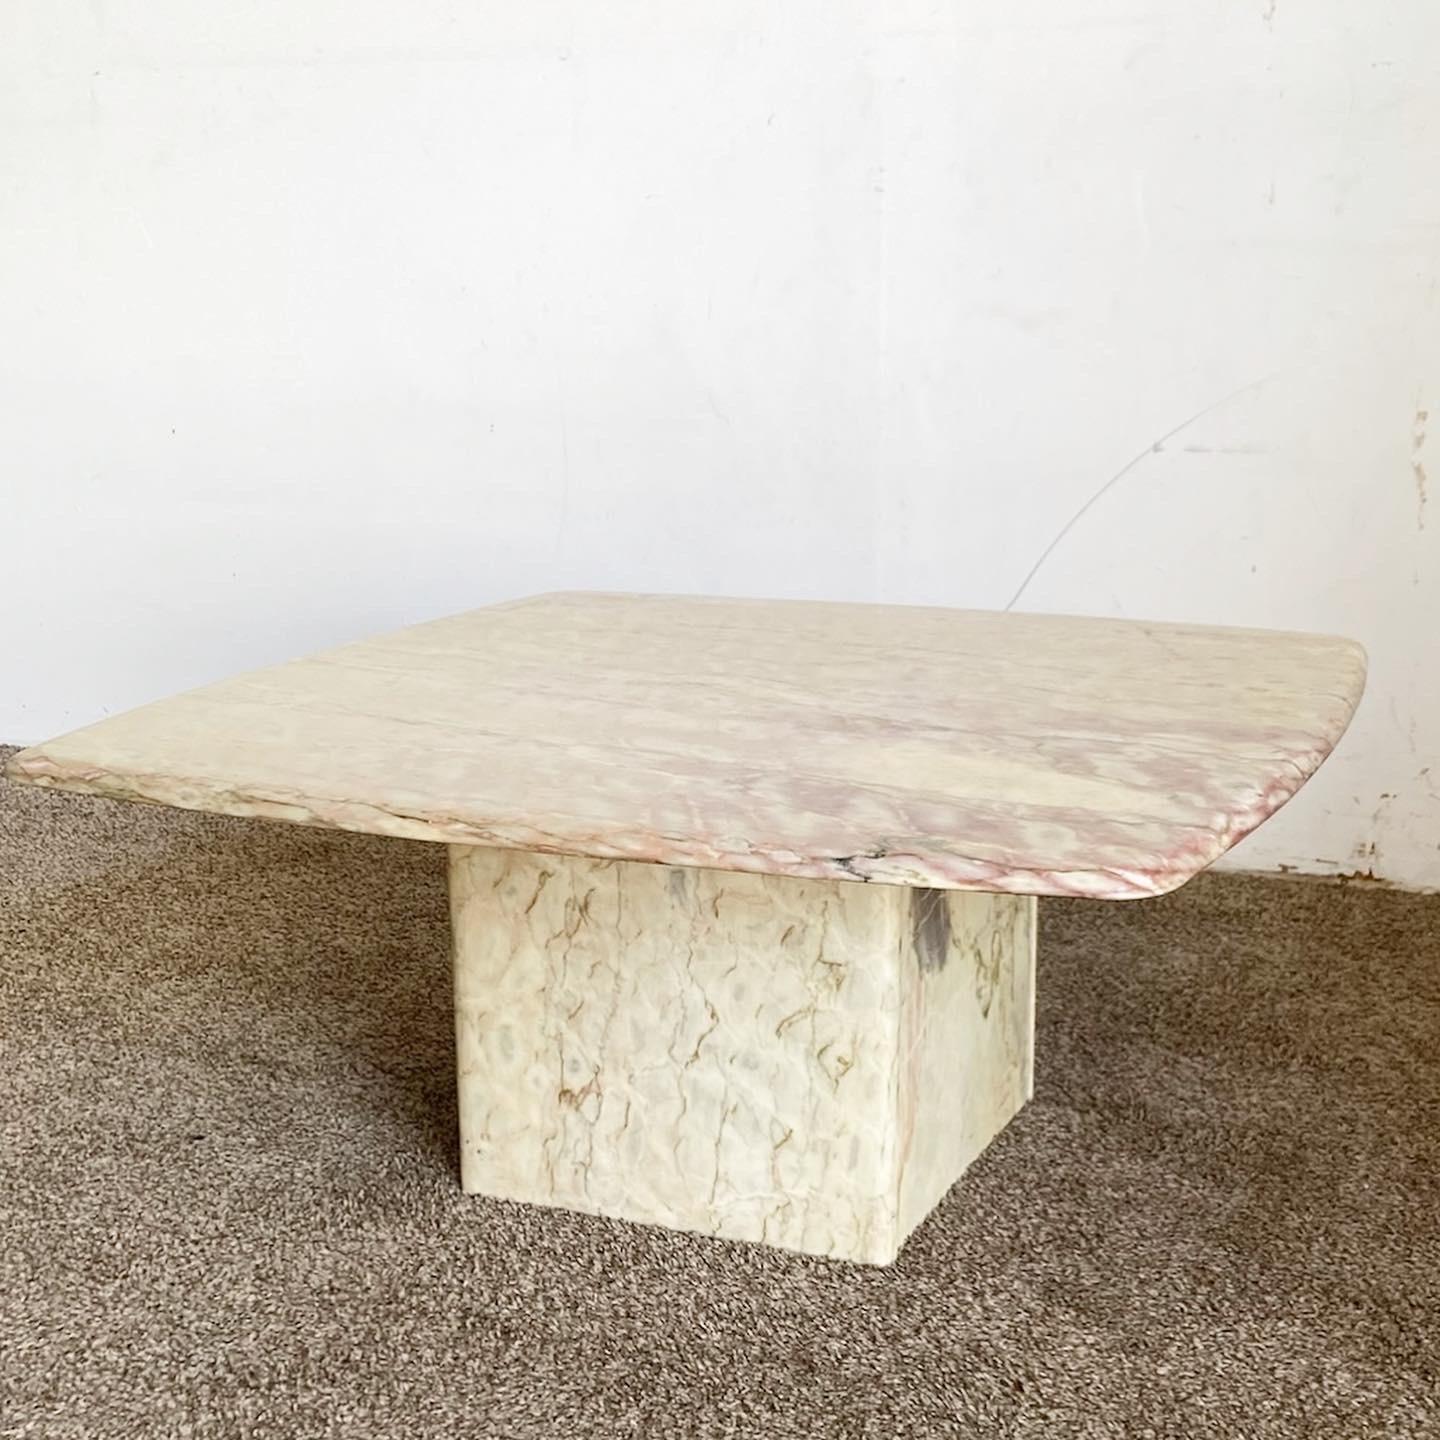 Enhance your living room's ambiance with the Cream and Pink Marble Coffee Table. Featuring a unique rounded square top, this exceptional piece not only serves as a functional table but also showcases the natural beauty and intricate veining of